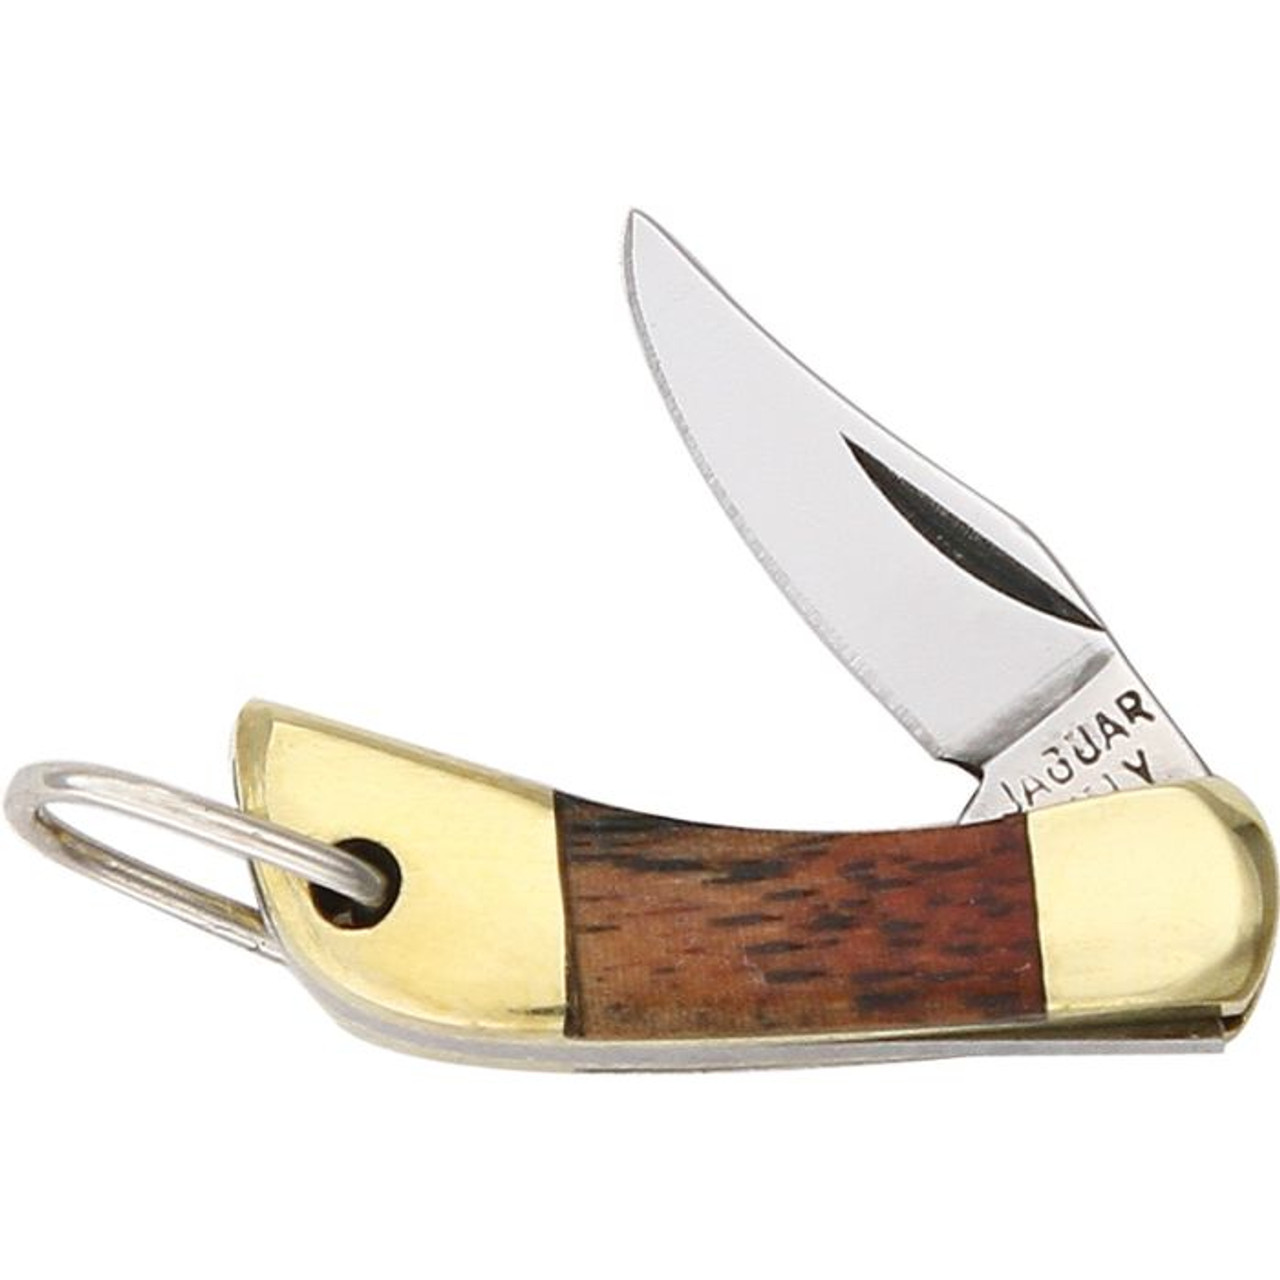 Maserin Mignon Folding Knife (699/T)- 0.52" Satin Stainless Steel Clip Point Plain Blade, Wood Handle